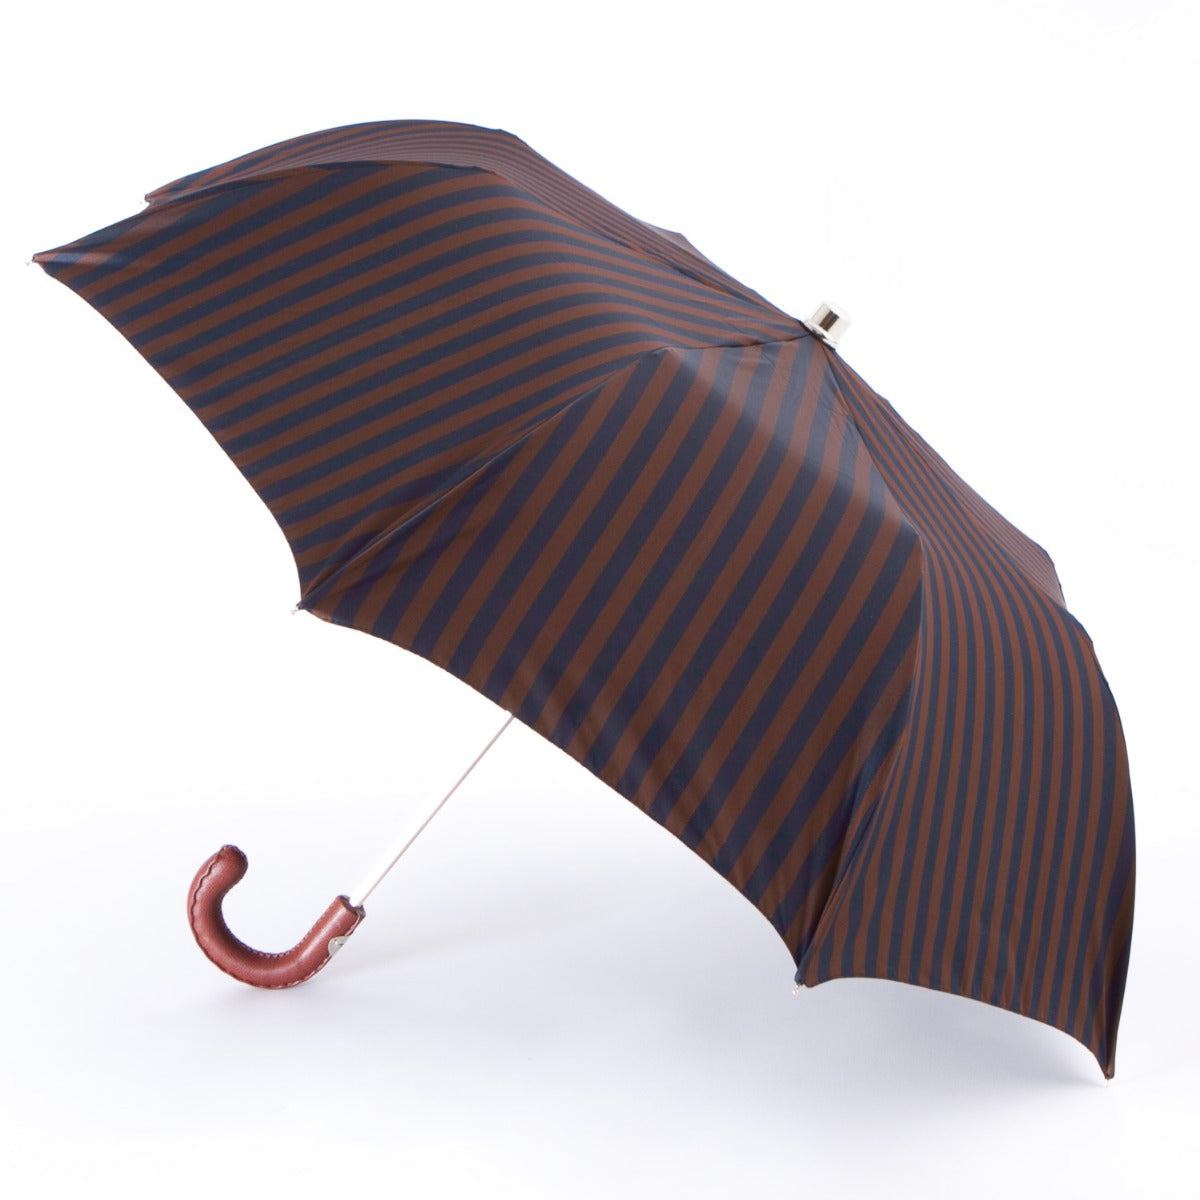 A Navy and Brown Stripe Travel Umbrella with Leather Handle from KirbyAllison.com in Milan, Italy.